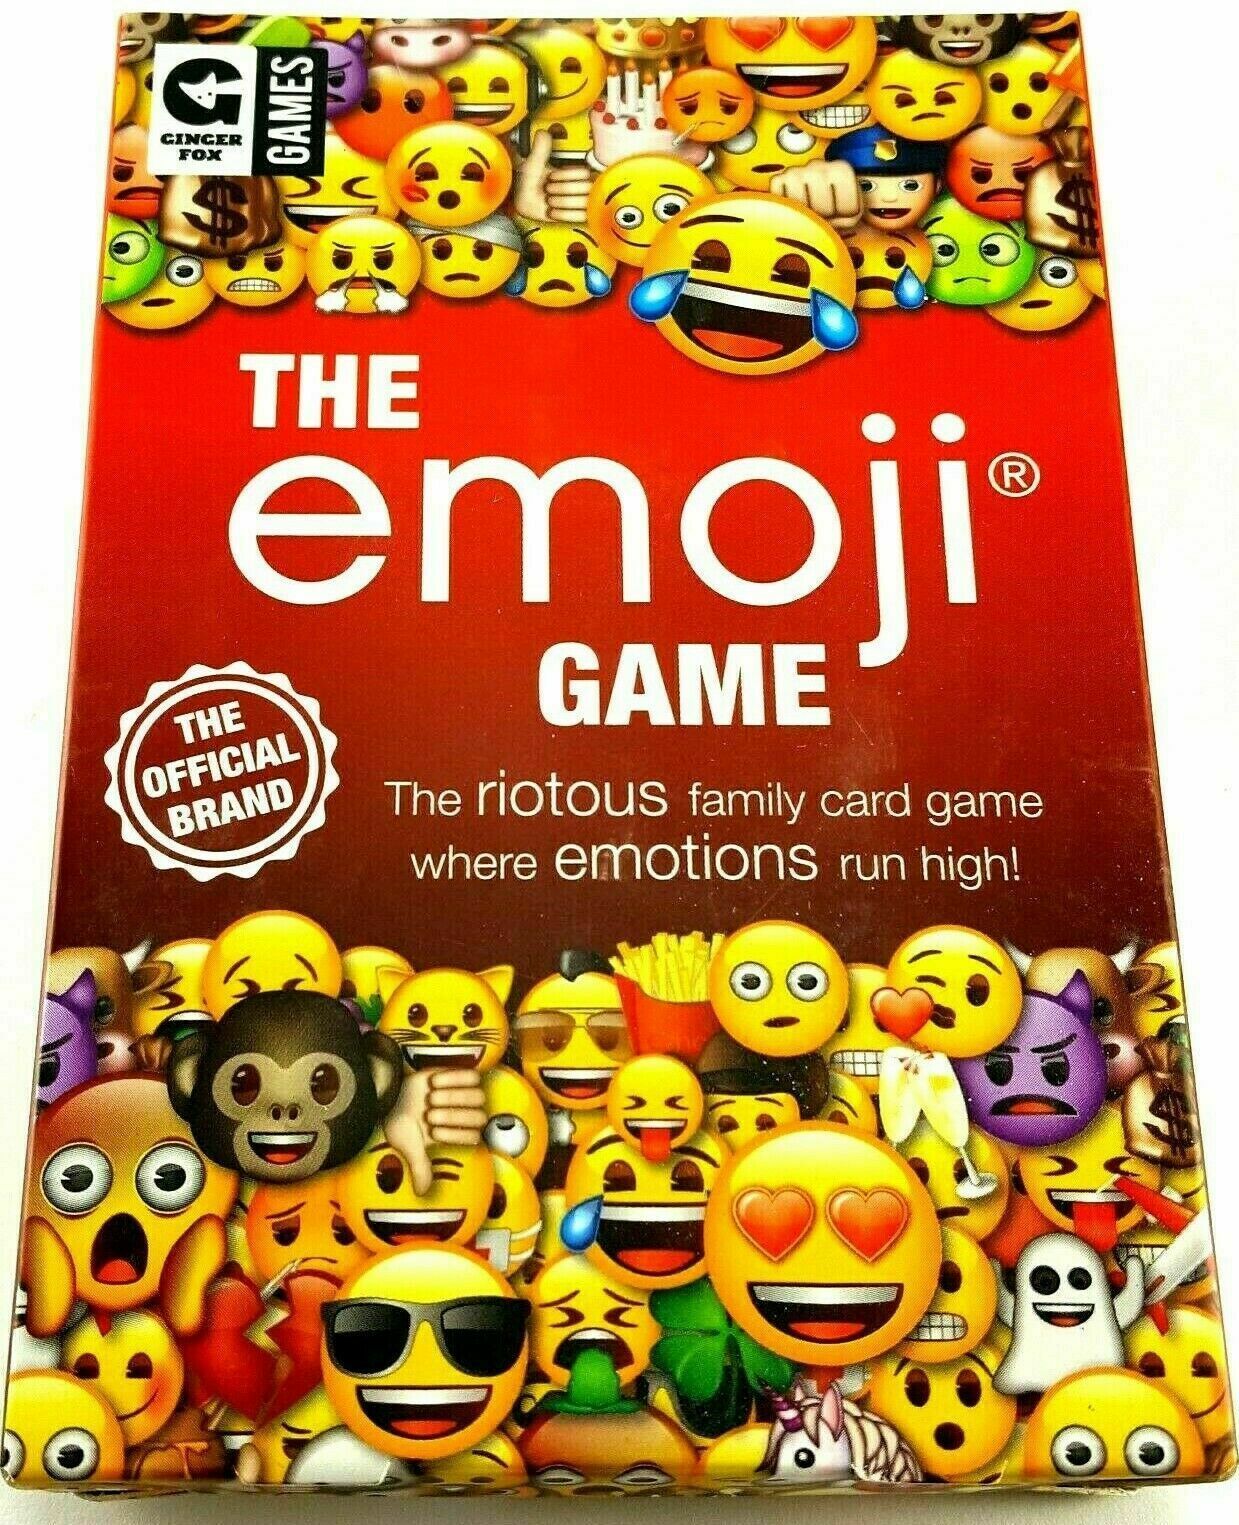 The Emoji Game Card Game Ginger Fox Games emotions run high official brand Movie